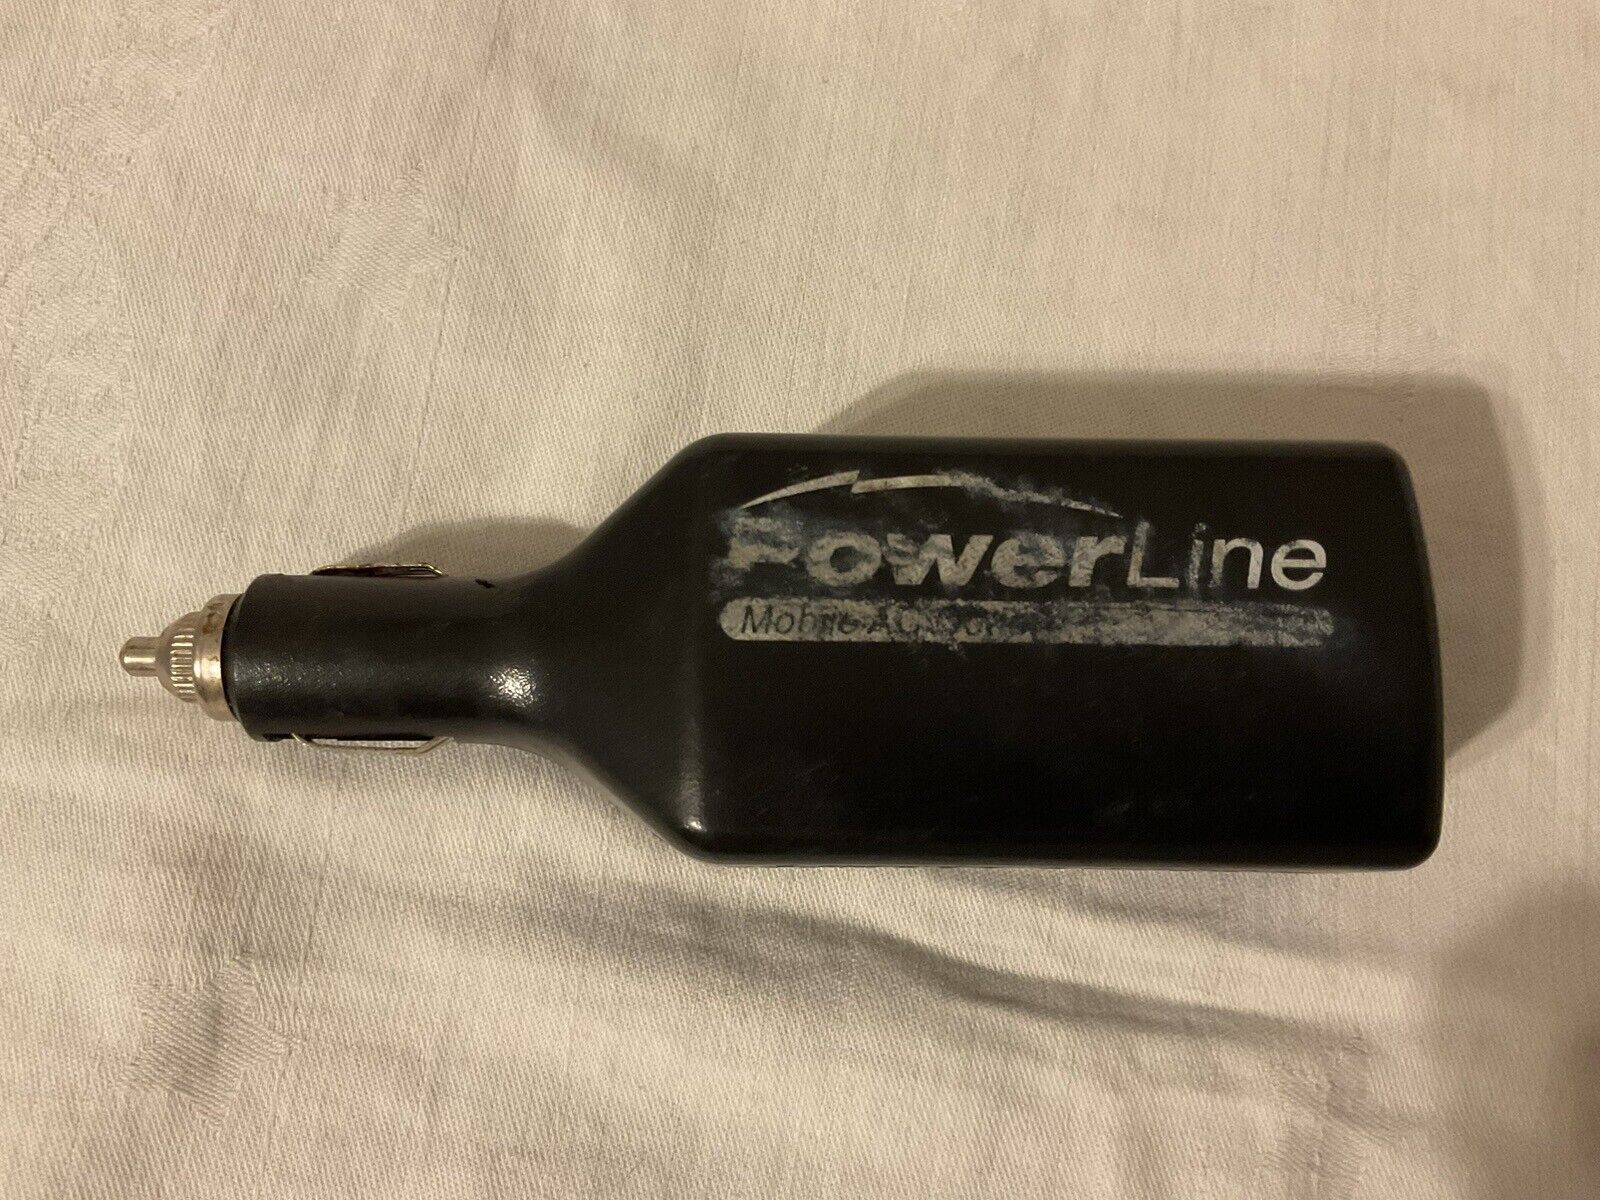 Powerline Mobile AC Outlet Inverter Car Adapter 75 Watts Peak TESTED